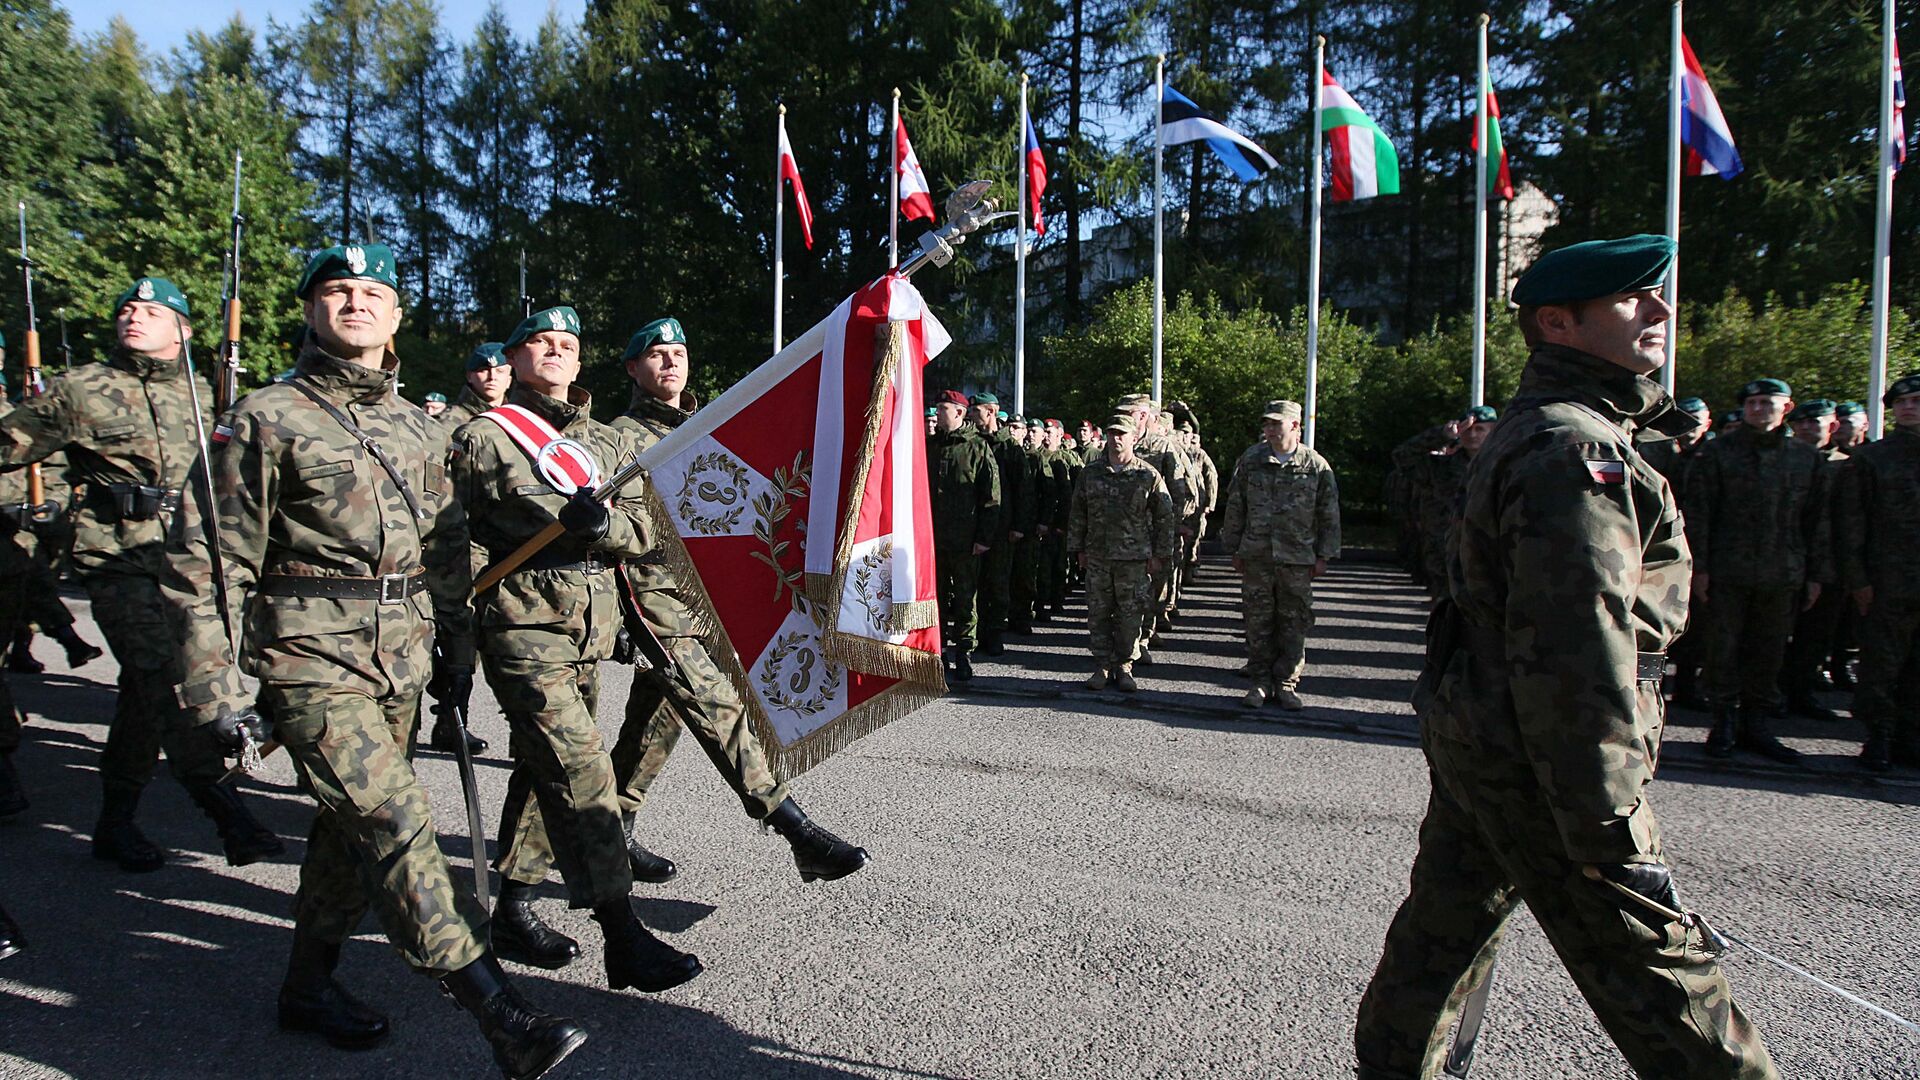  The Honorary Company of the Polish army walks in front of troops that will take part in major international Anakonda-14 defense exercise during the opening ceremony at the National Defense Academy in Warsaw-Rembertow district, Wednesday, Sept. 24, 2014 - Sputnik International, 1920, 12.05.2022